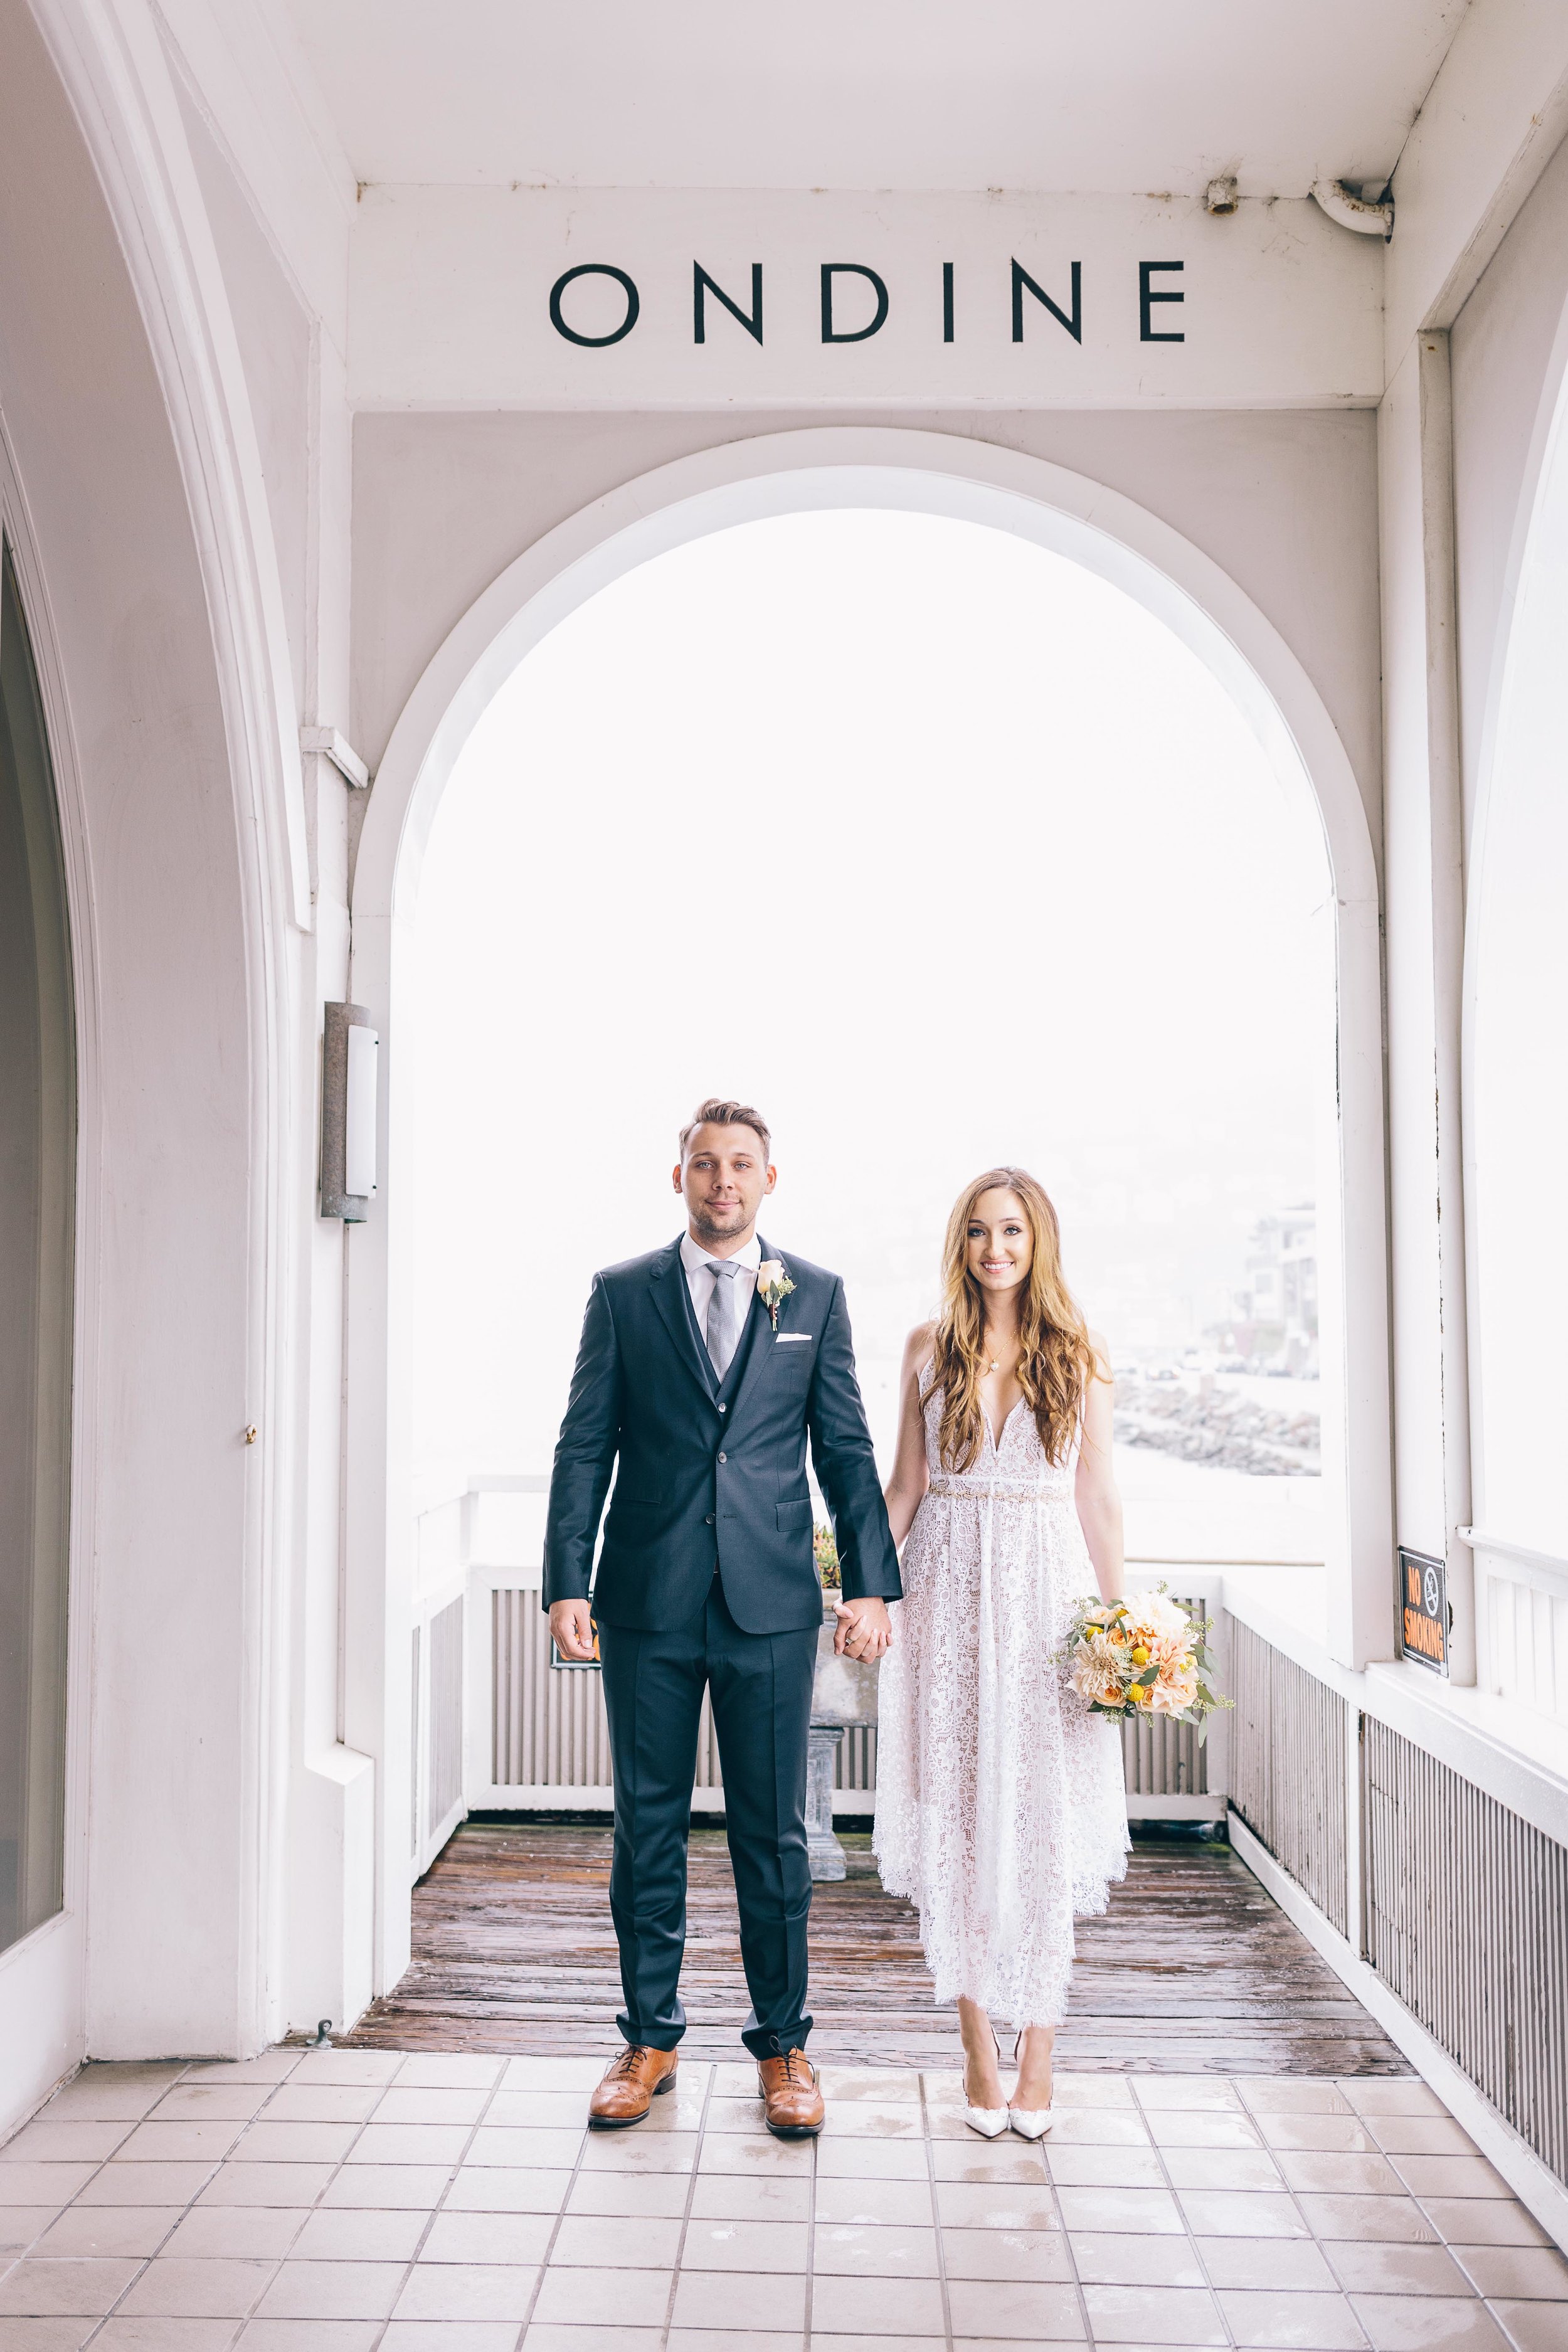 Sausalito Wedding at Ondine Events by JBJ Pictures - Photographer in Sausalito and Marin County - Engagment & Wedding Photography in San Francisco, Marin, Sonoma, and Napa (1a).jpg